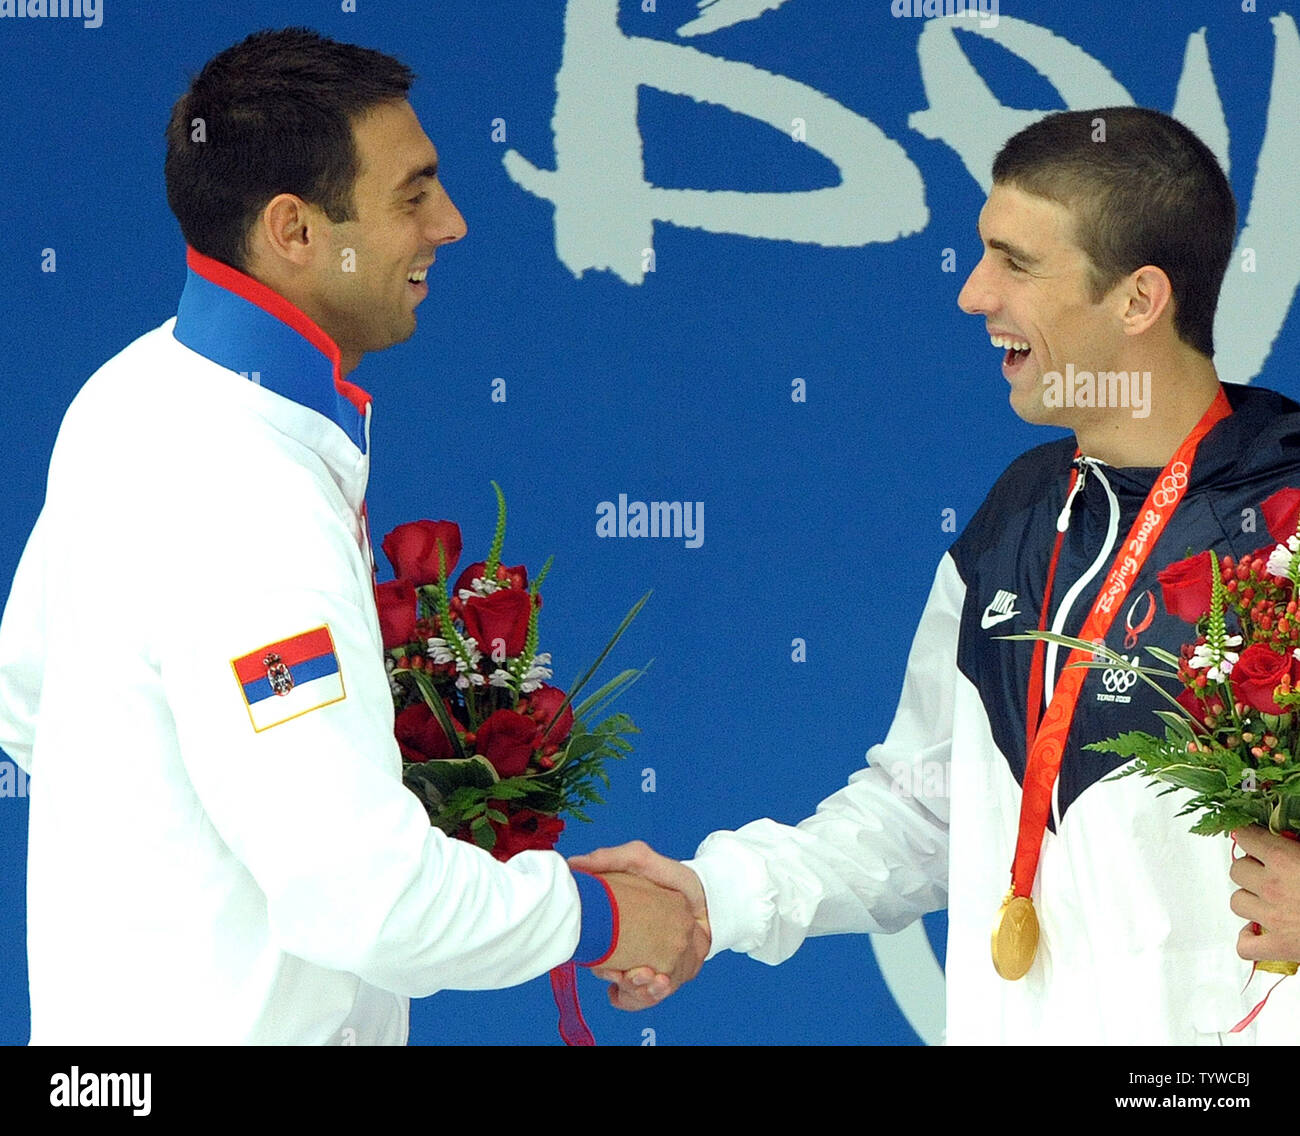 USA's Michael Phelps (gold) shakes hands with Serbia's Milorad Cavic (silver) (R) after they received their medals for the Men's 100M Butterfly final at the National Aquatic Center (Water Cube) during the 2008 Summer Olympics in Beijing, China, on August 16, 2008. Phelps is tied with Mark Spitz, the swimmer who set the record of 7 gold medals in a single Olympics in Munich, 1972.   (UPI Photo/Roger L. Wollenberg) Stock Photo